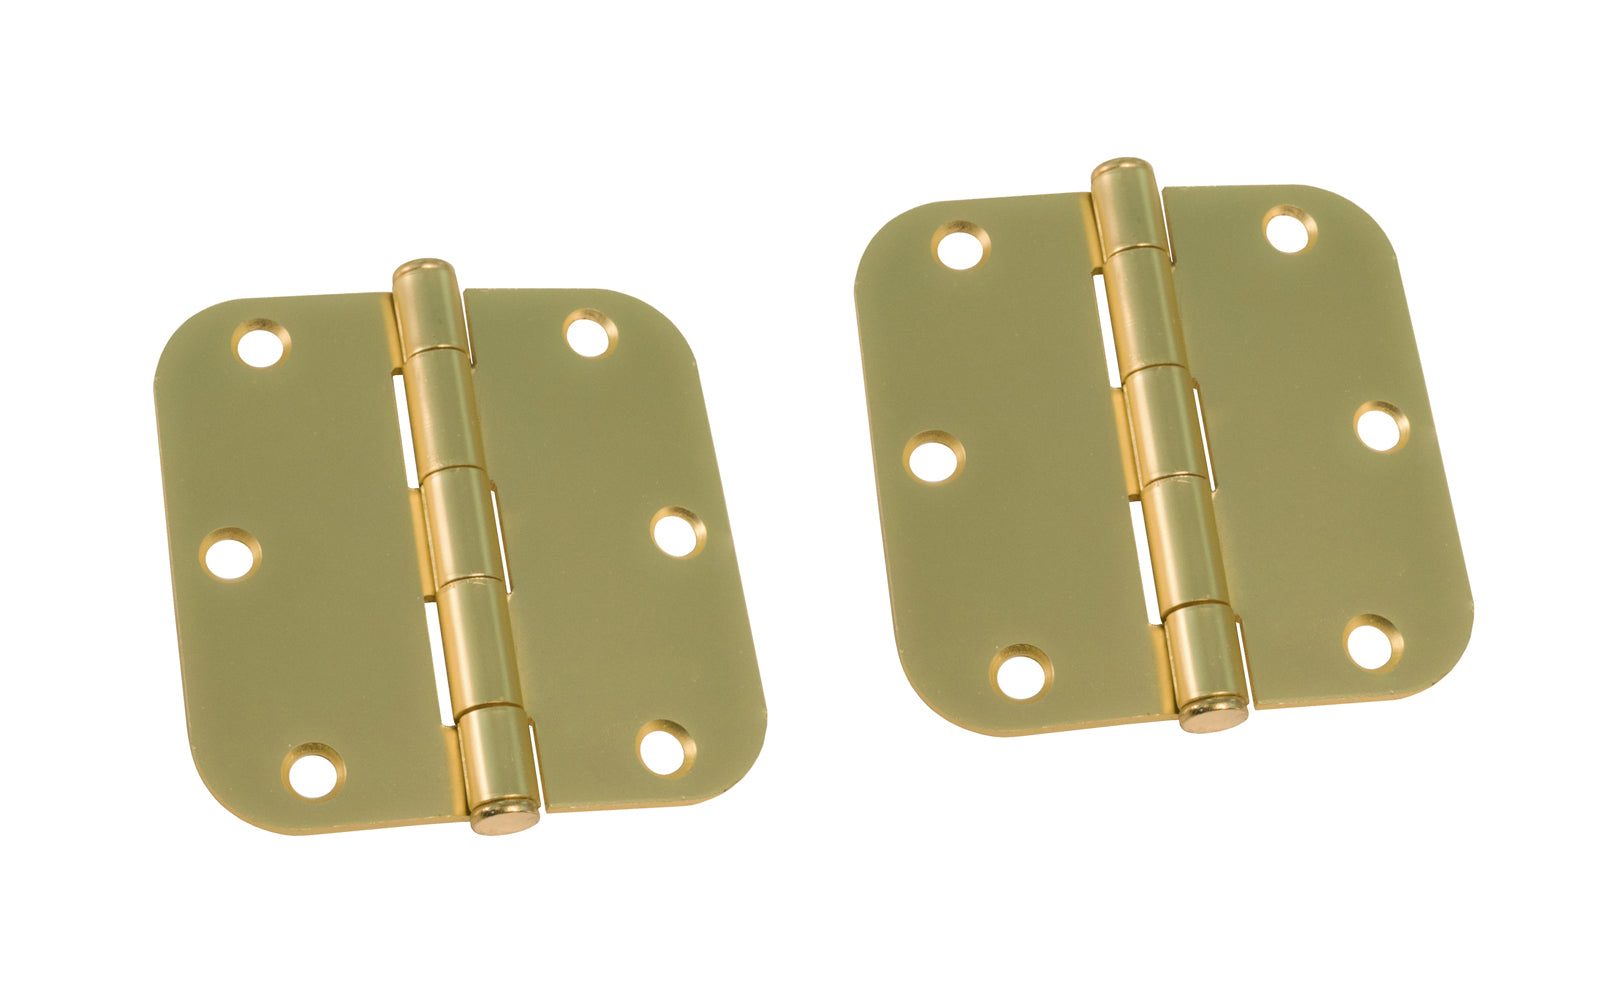 A pair of 3-1/2" Satin Brass Door Hinges with 5/8" radius corners & a removable pin. Satin Brass finish on steel material. Countersunk holes. Includes flat head screws. 3-1/2" x 3-1/2" door hinge size. Five knuckle, full mortise design. Ultra Hardware No. 35220.